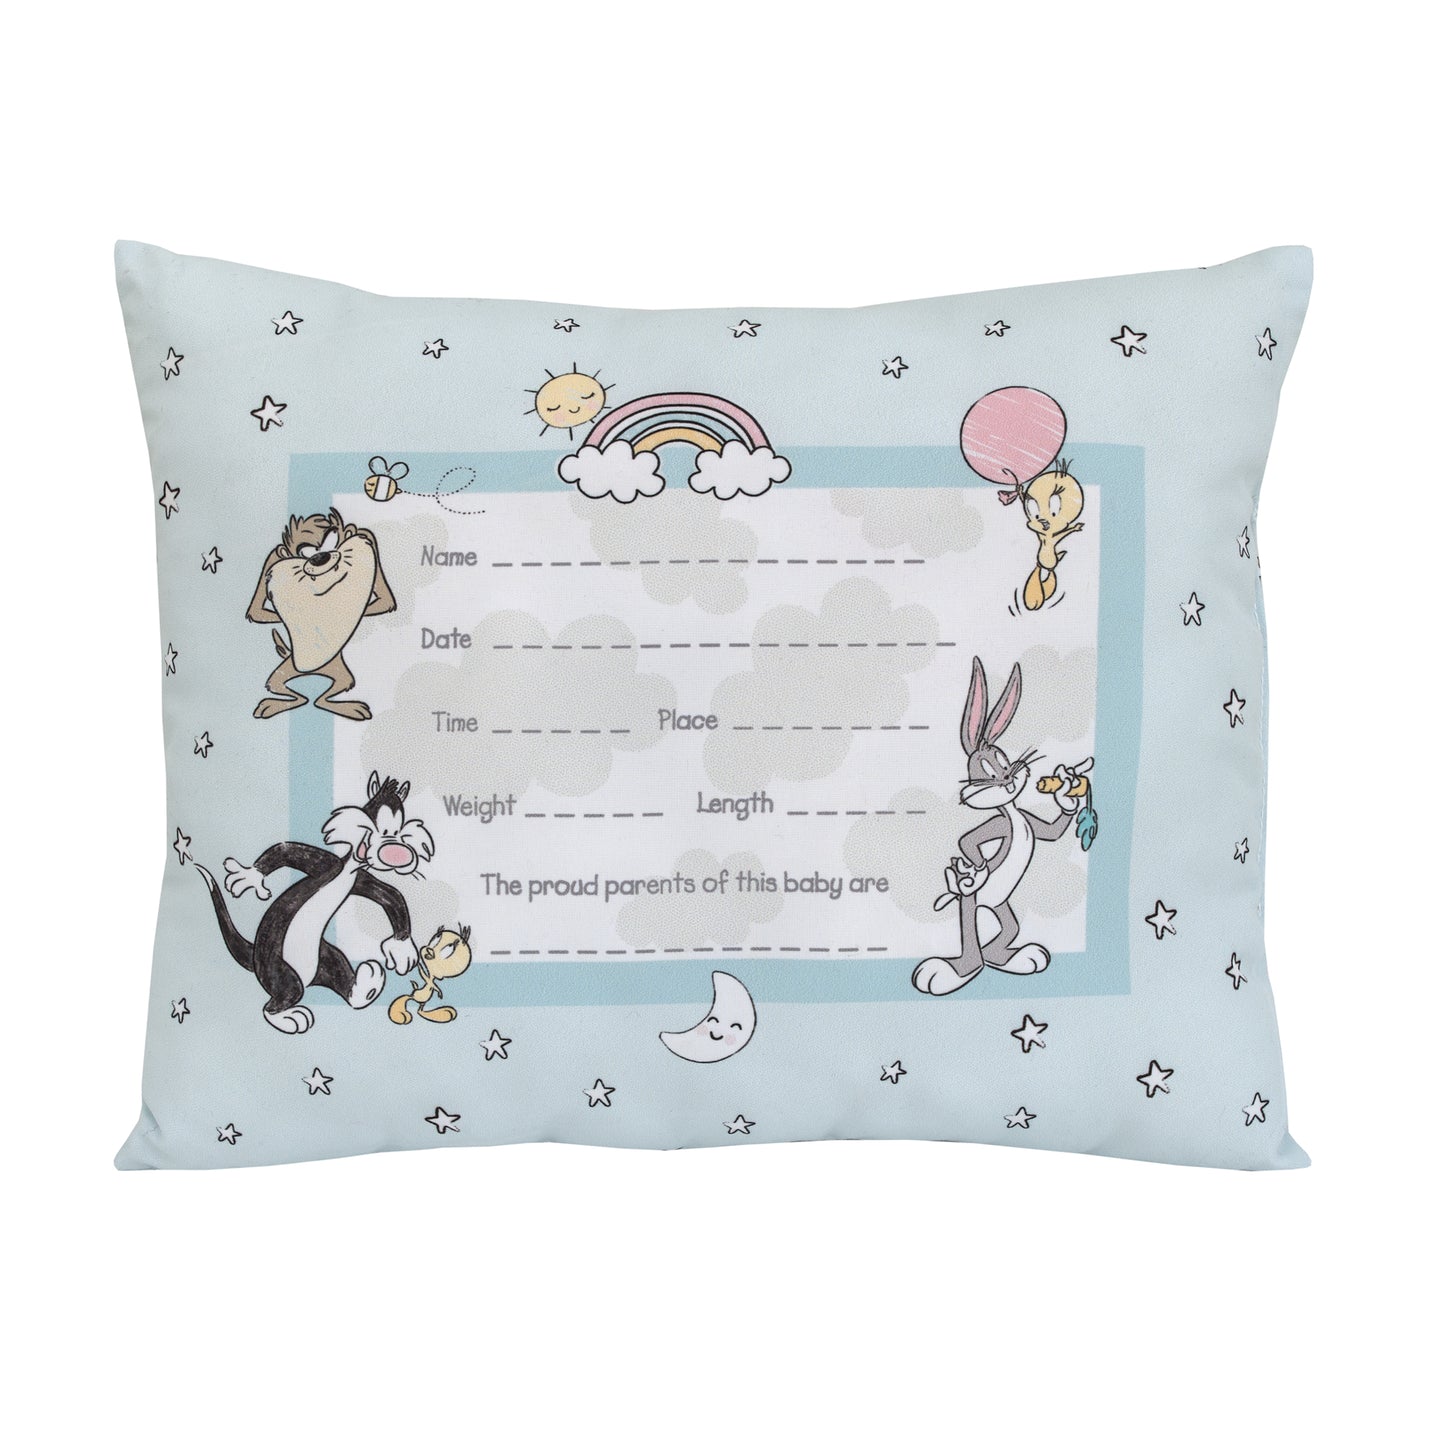 Warner Brothers Looney Tunes Best Buds Pastel Blue and White Bugs Bunny, Tweety, Tasmanian Devil, and Sylvester the Cat Keepsake Pillow